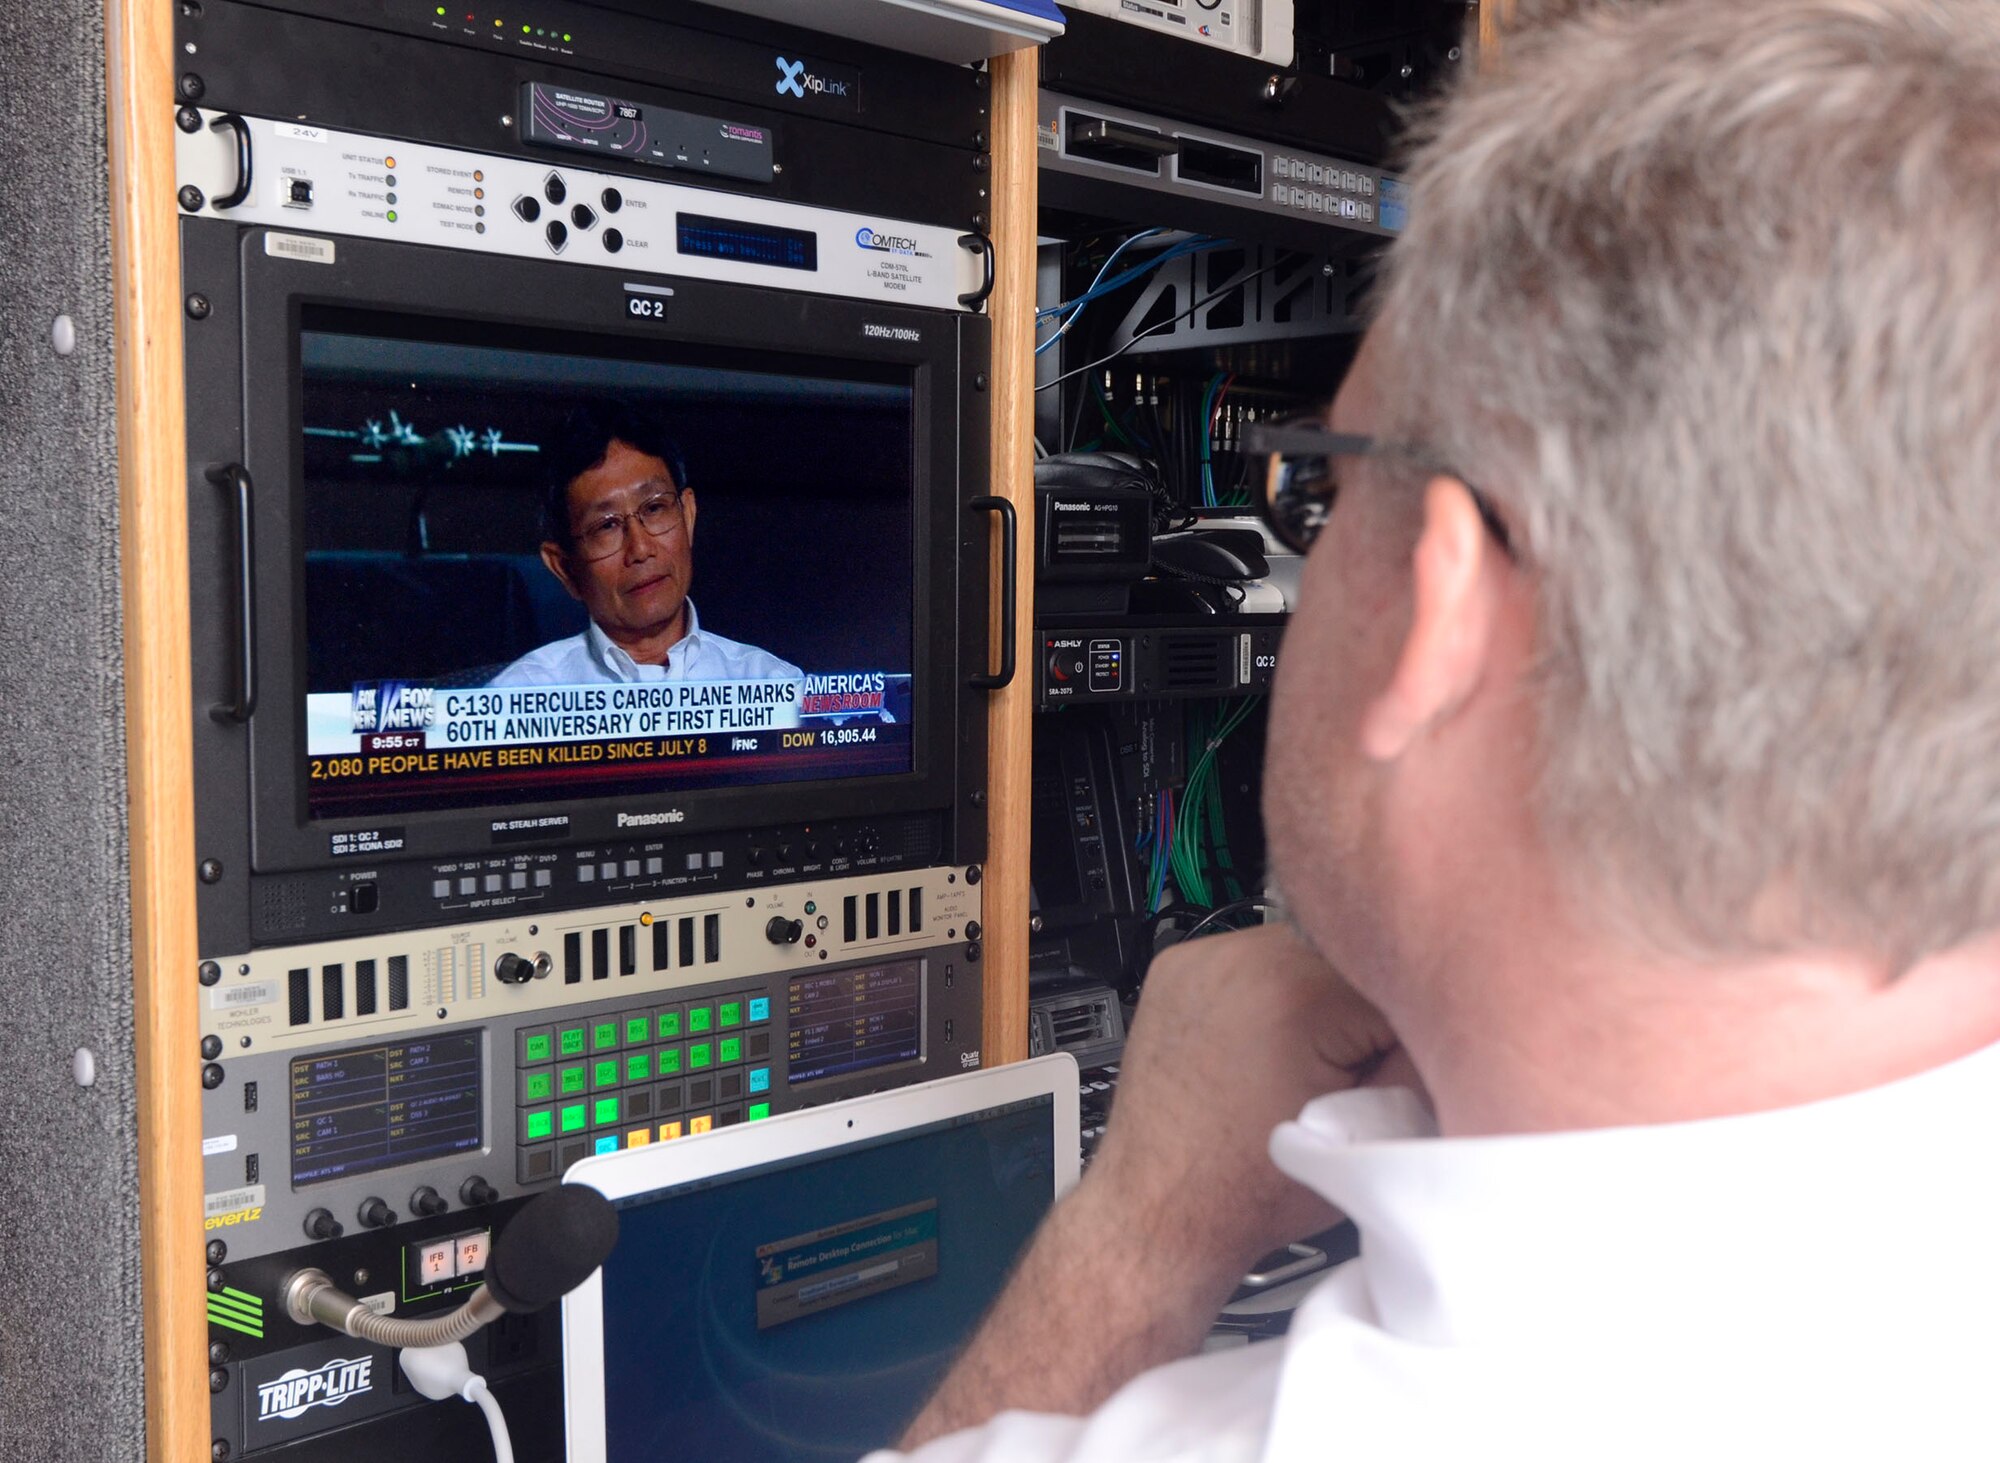 A Fox News Channel producer broadcasts live from the Dobbins Air Reserve Base airfield Aug. 19, 2014 in recognition of the 60th Anniversary of the C-130 aircraft. The segment featured Mr. Tim Nguyen, an aviator in the Vietnamese Air Force, and one of the final passengers to board a U.S. Air Force C-130 on what would be the final flight out of Vietnam. (U.S. Air Force photo/Don Peek)
